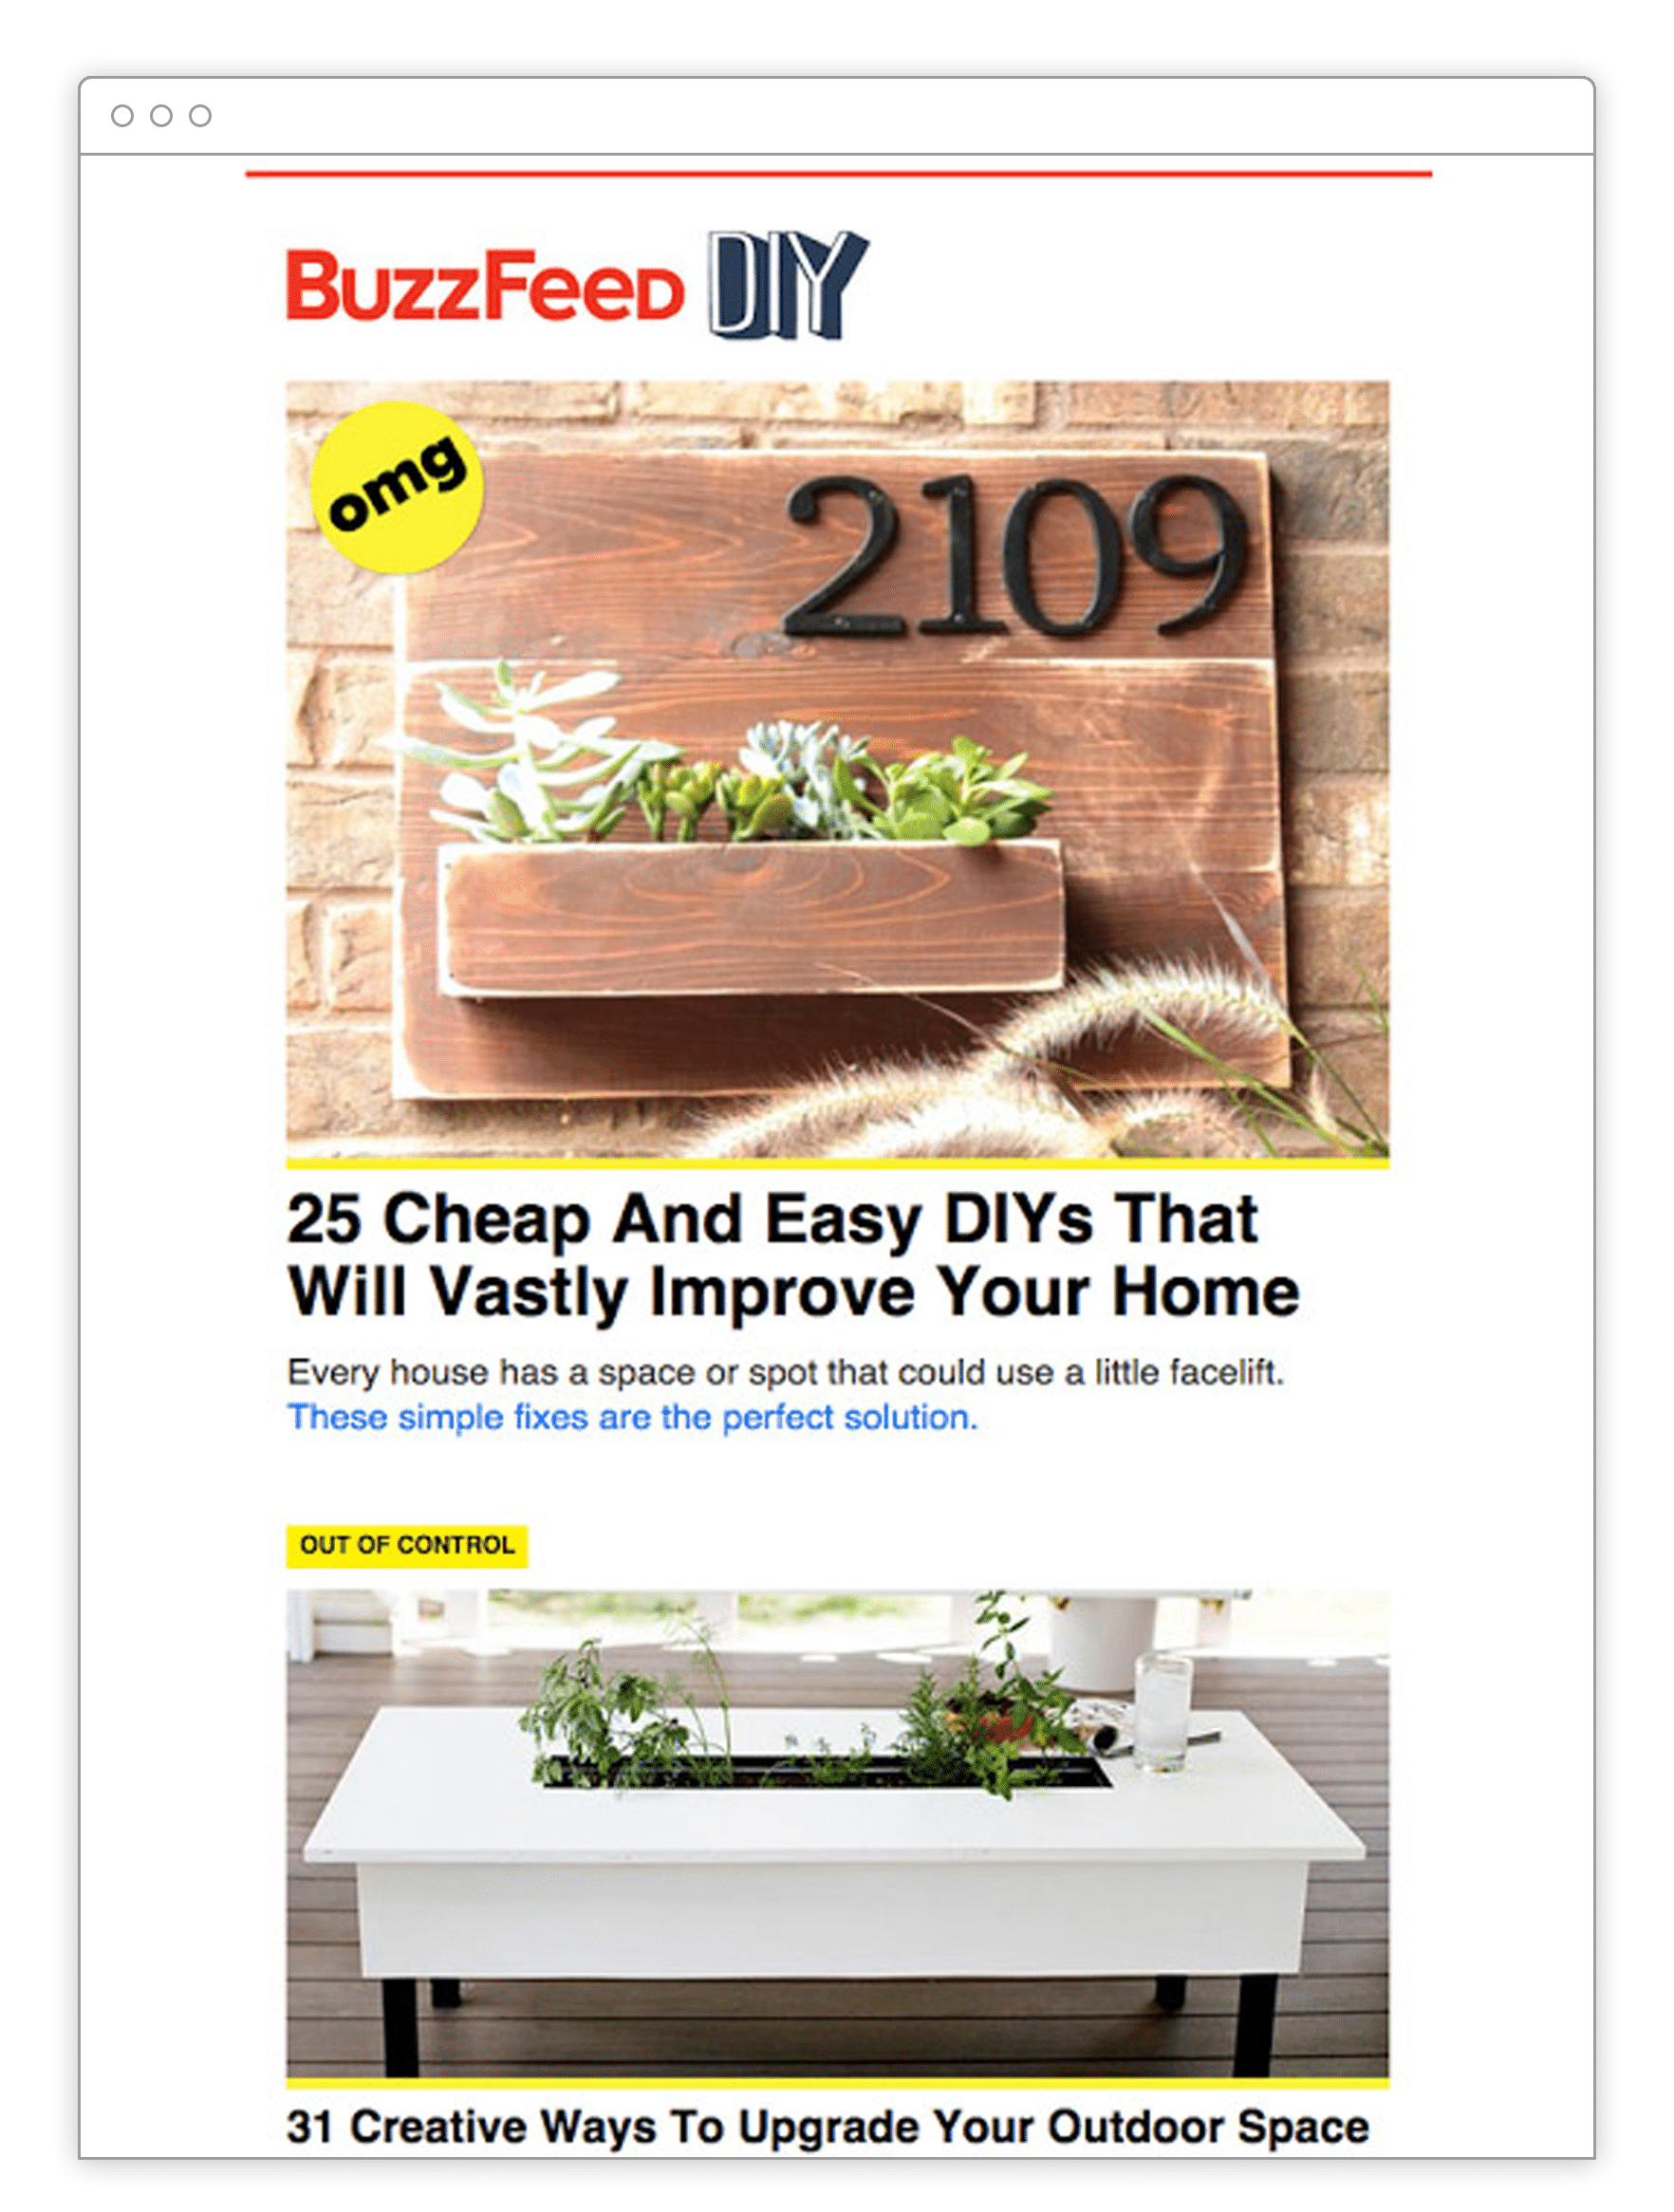 Buzzfeed email newsletter. 